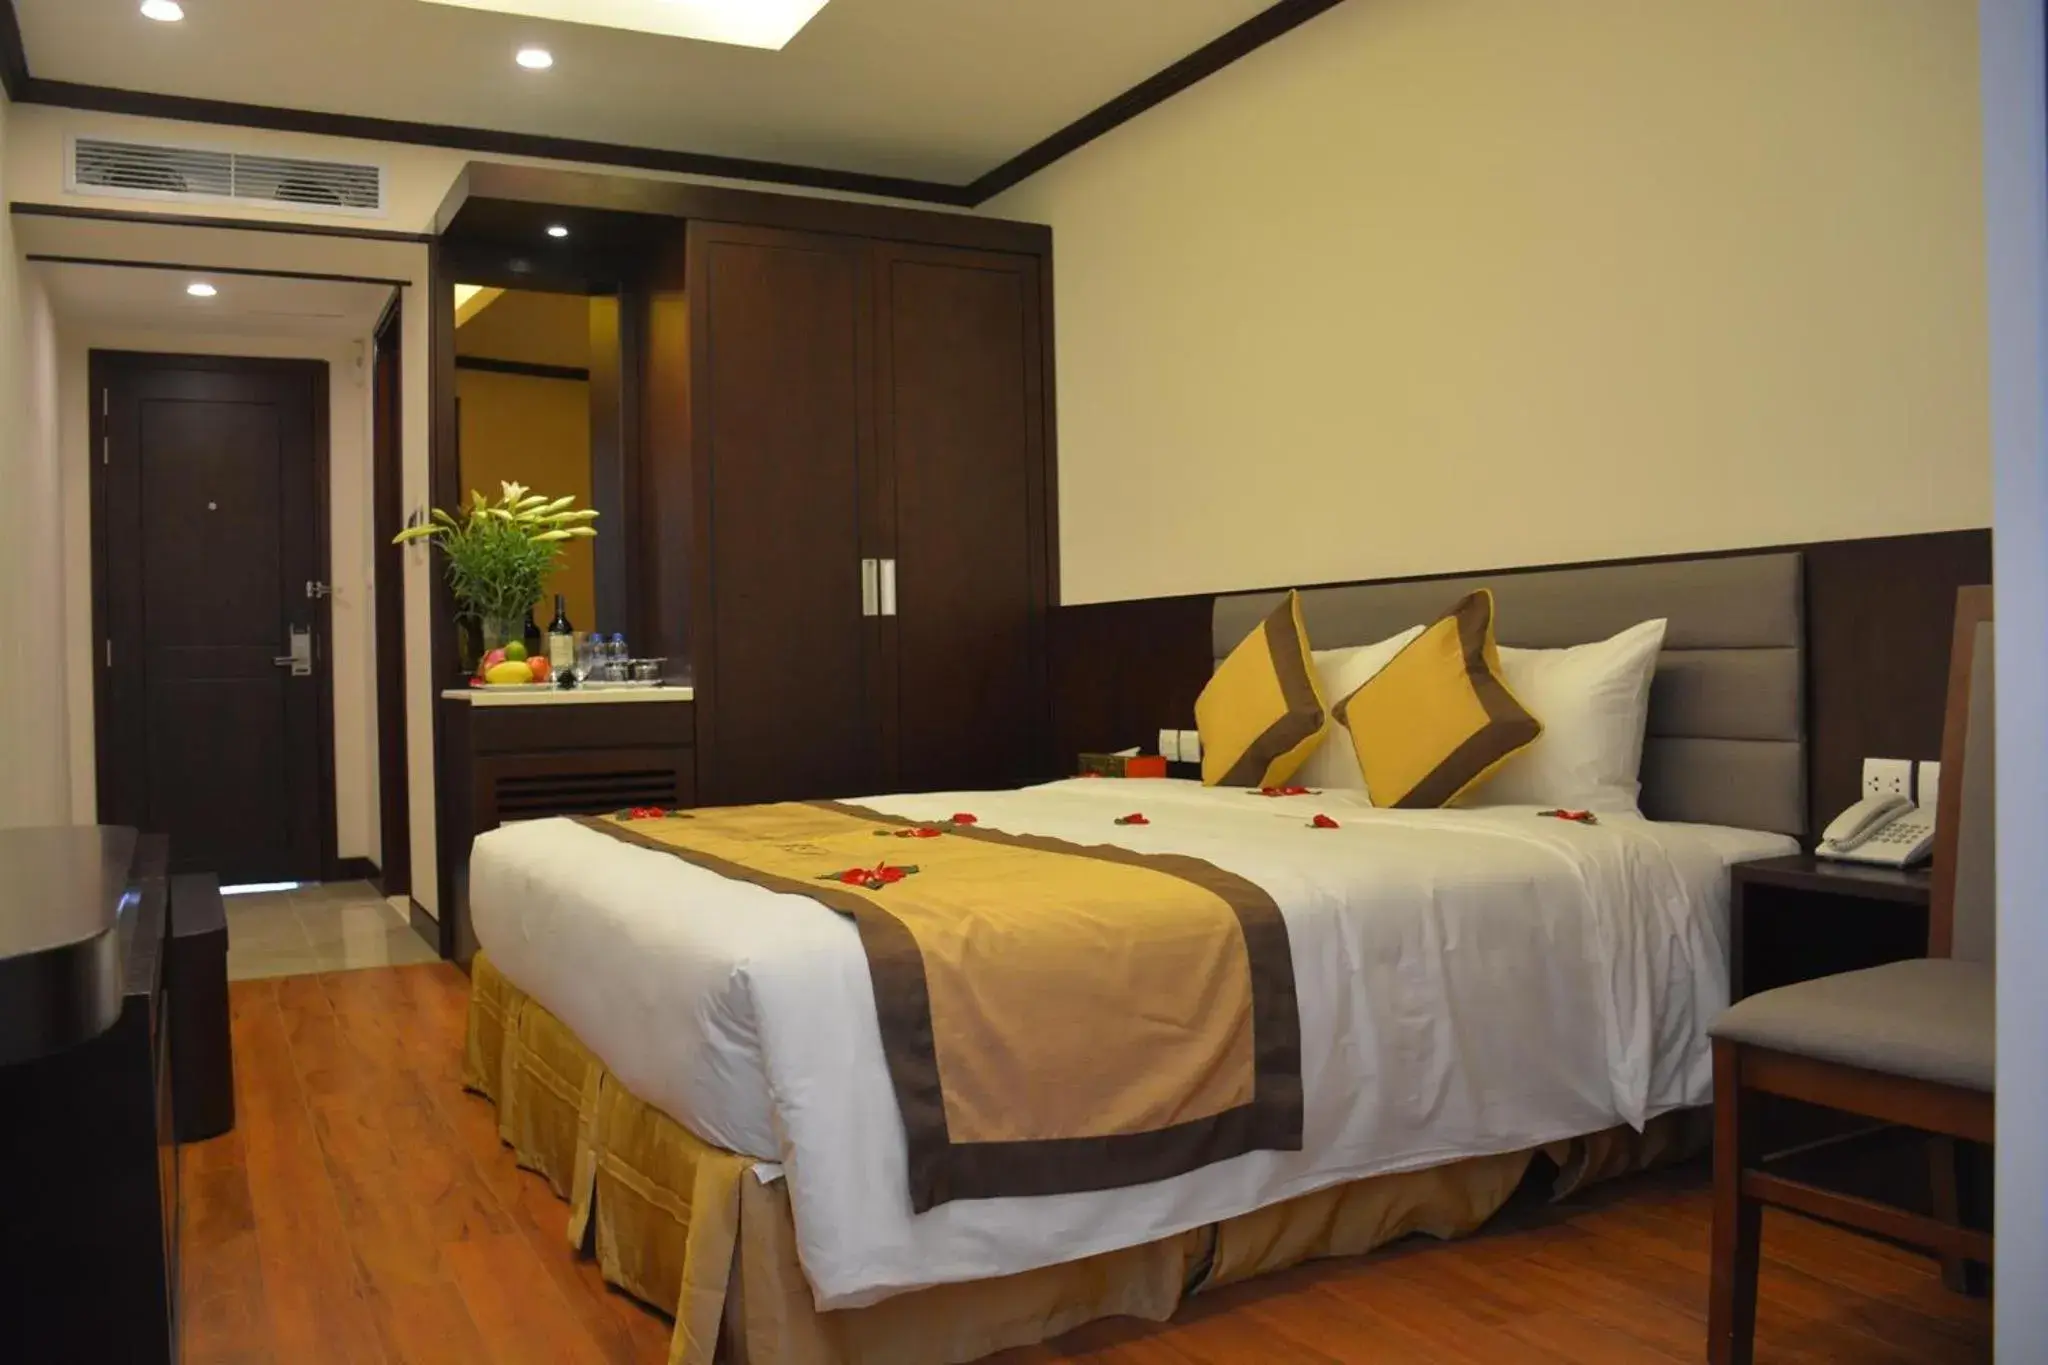 Queen Room with Balcony in Lenid Hotel Tho Nhuom